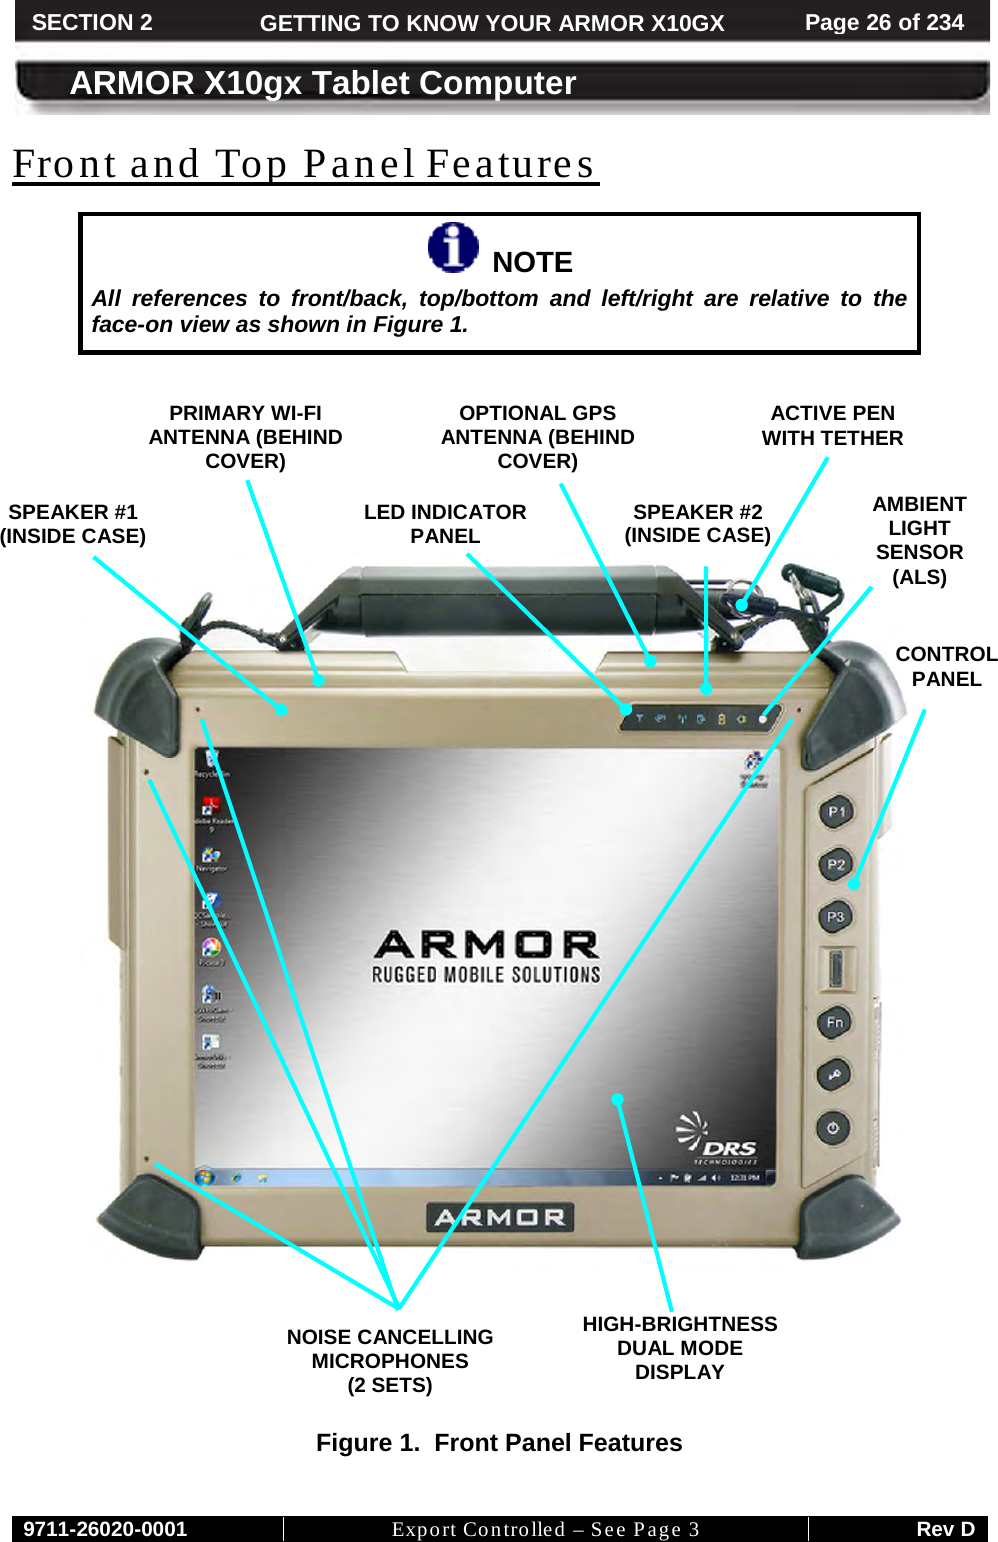     9711-26020-0001 Export Controlled – See Page 3 Rev D SECTION 2 GETTING TO KNOW YOUR ARMOR X10GX Page 26 of 234  ARMOR X10gx Tablet Computer   NOTE Front and Top Panel Features All references to front/back, top/bottom and left/right are relative to the face-on view as shown in Figure 1.               Figure 1.  Front Panel Features   CONTROL PANEL HIGH-BRIGHTNESS DUAL MODE DISPLAY OPTIONAL GPS ANTENNA (BEHIND COVER) LED INDICATOR PANEL ACTIVE PEN WITH TETHER NOISE CANCELLING MICROPHONES (2 SETS) AMBIENT LIGHT SENSOR (ALS)  SPEAKER #1 (INSIDE CASE) SPEAKER #2 (INSIDE CASE) PRIMARY WI-FI ANTENNA (BEHIND COVER) 